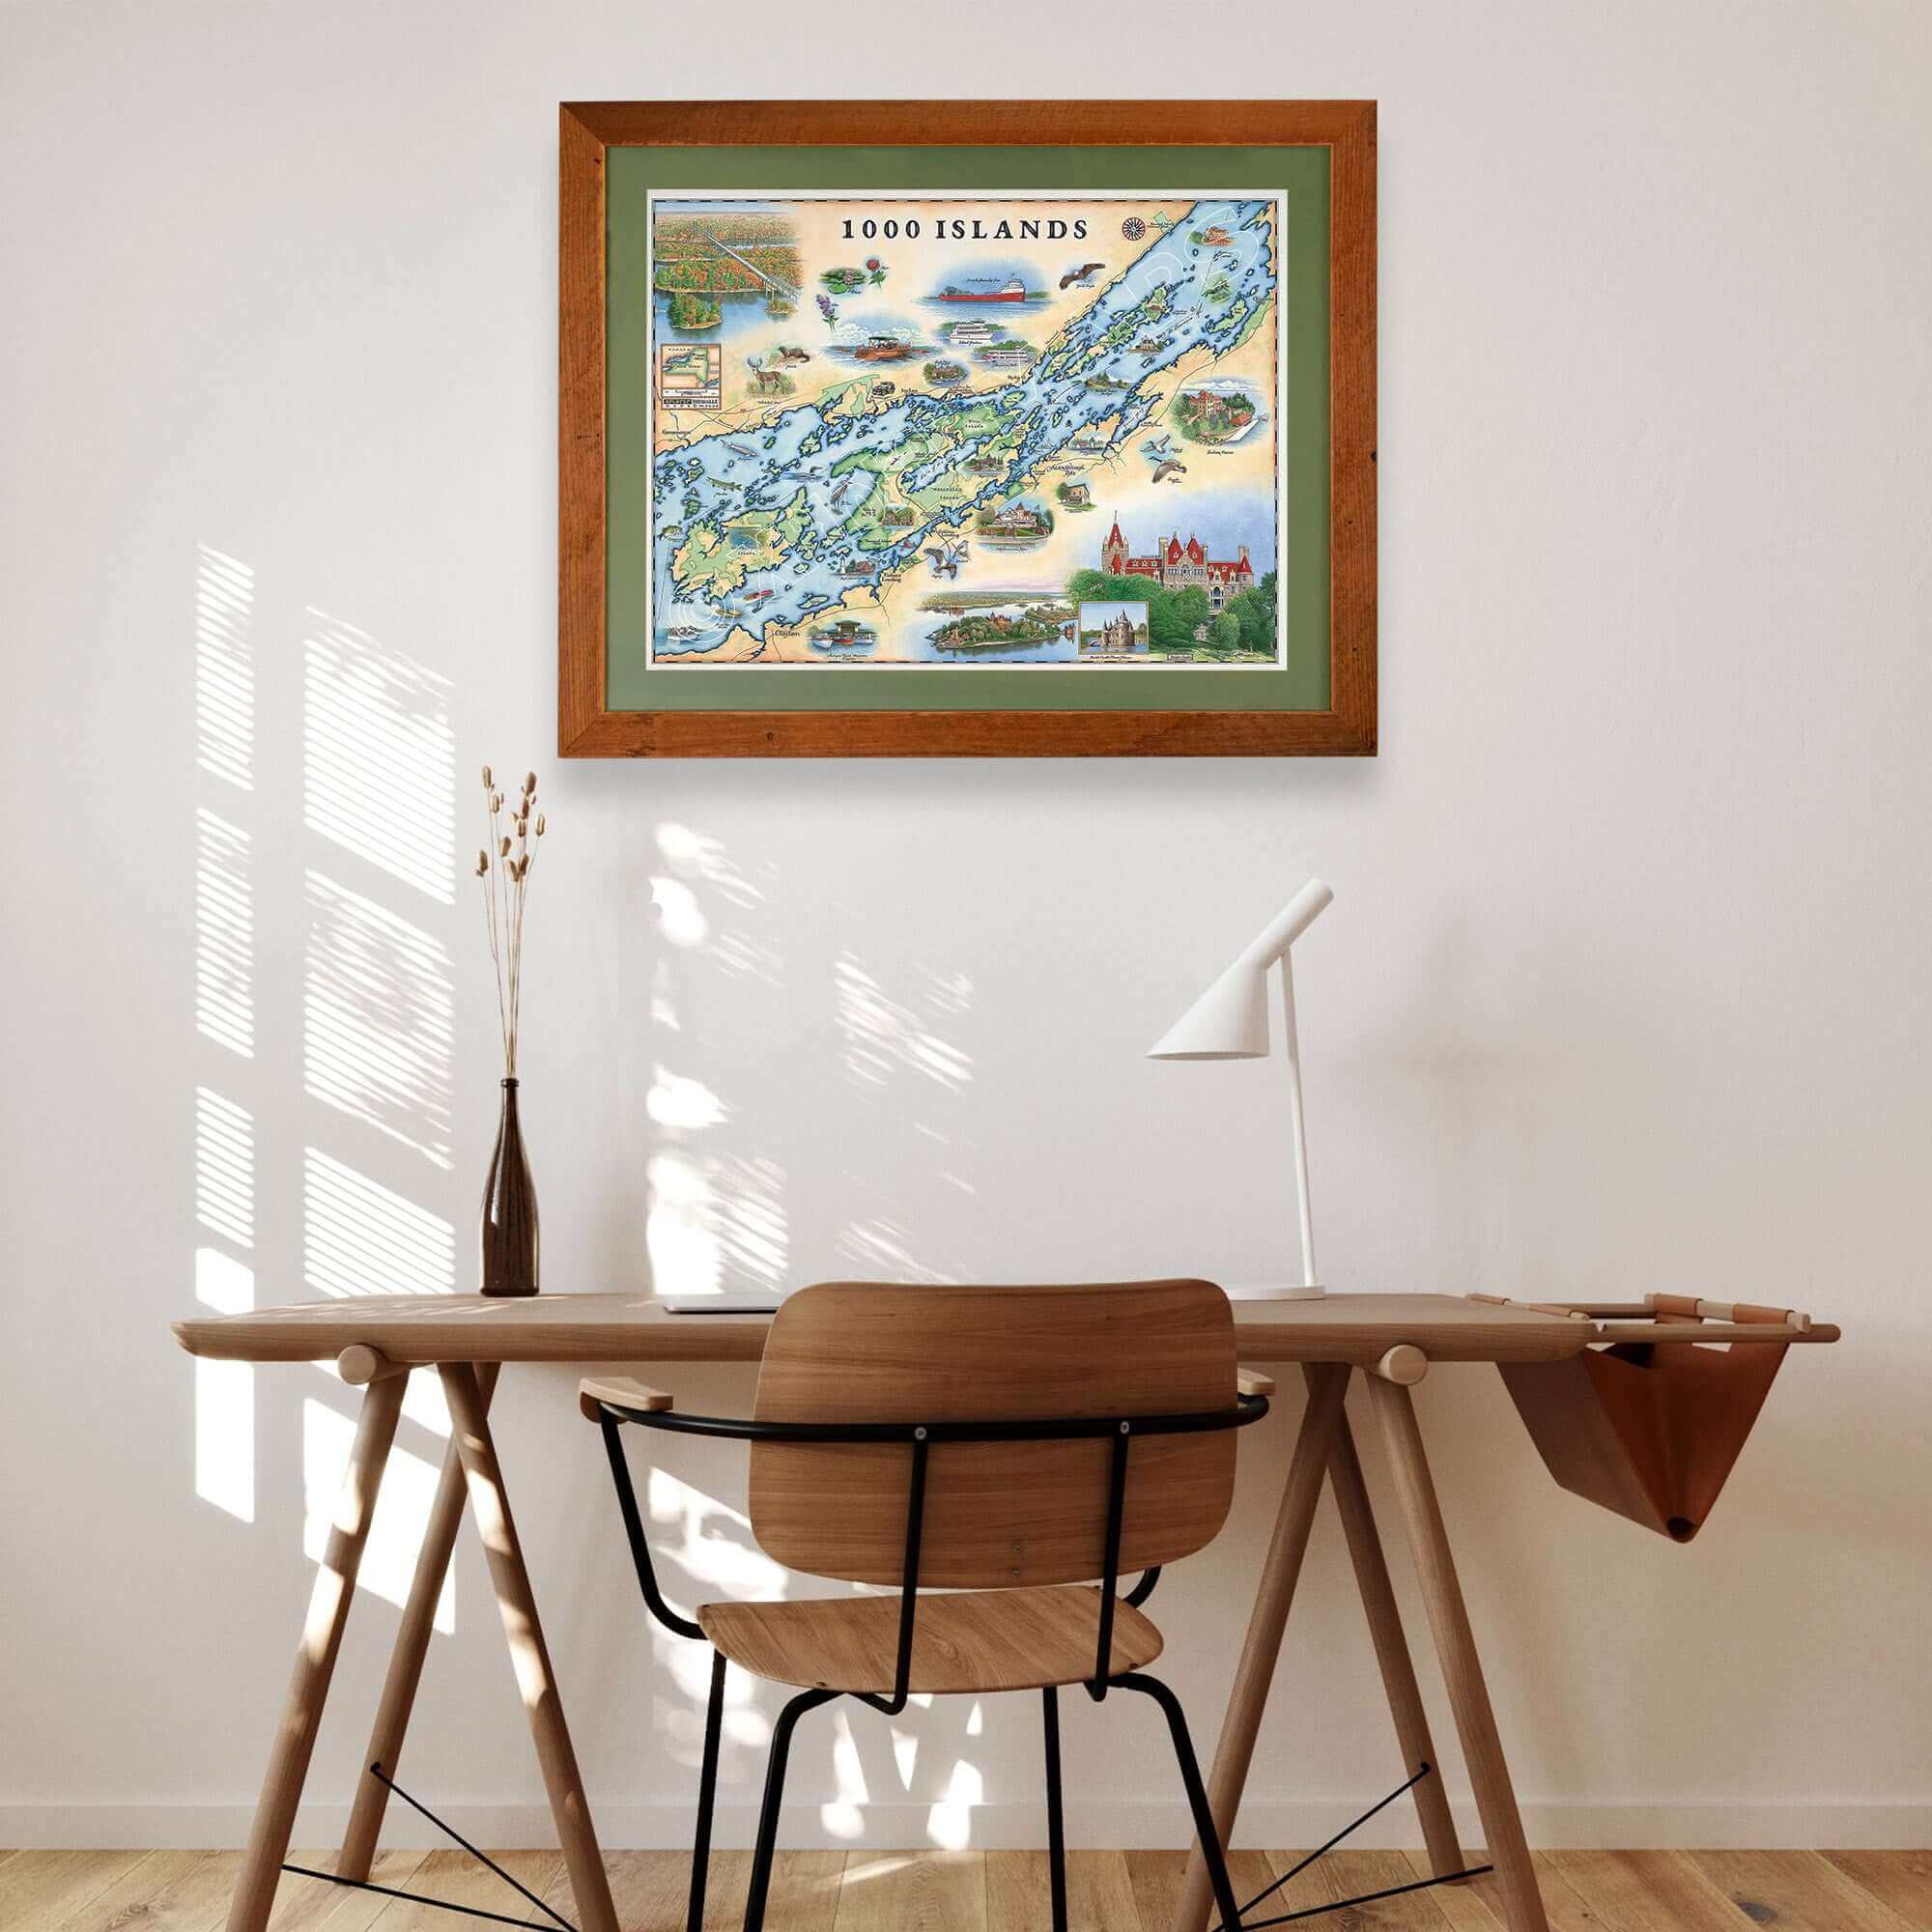 1000 Islands framed hand-drawn map with green mat hanging over a wooden desk and chair. 